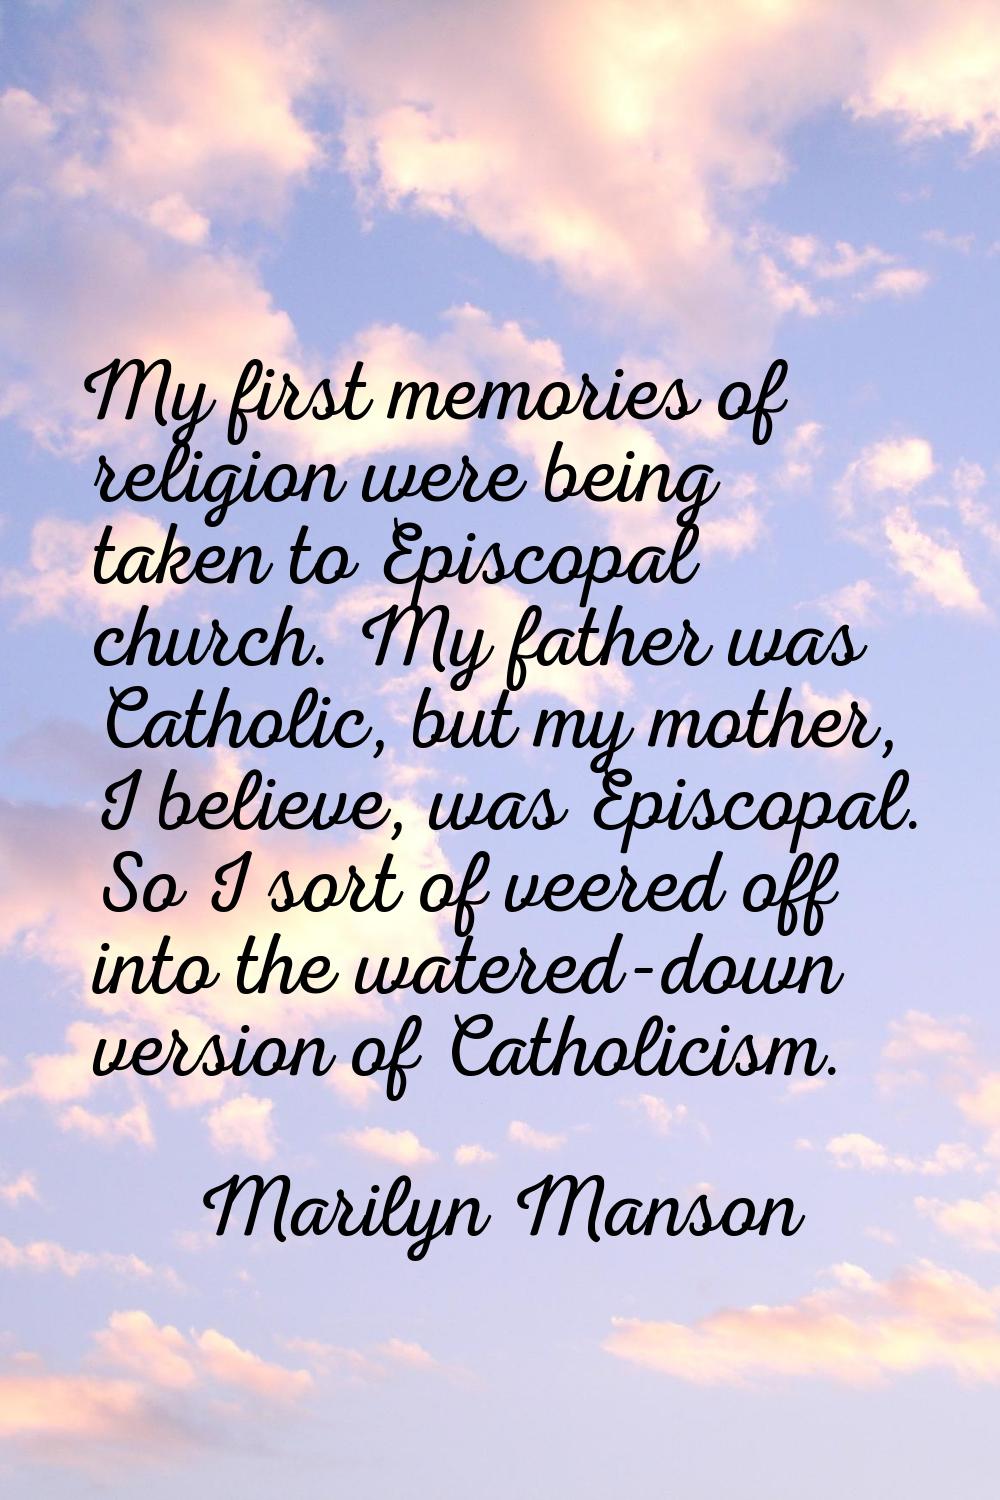 My first memories of religion were being taken to Episcopal church. My father was Catholic, but my 